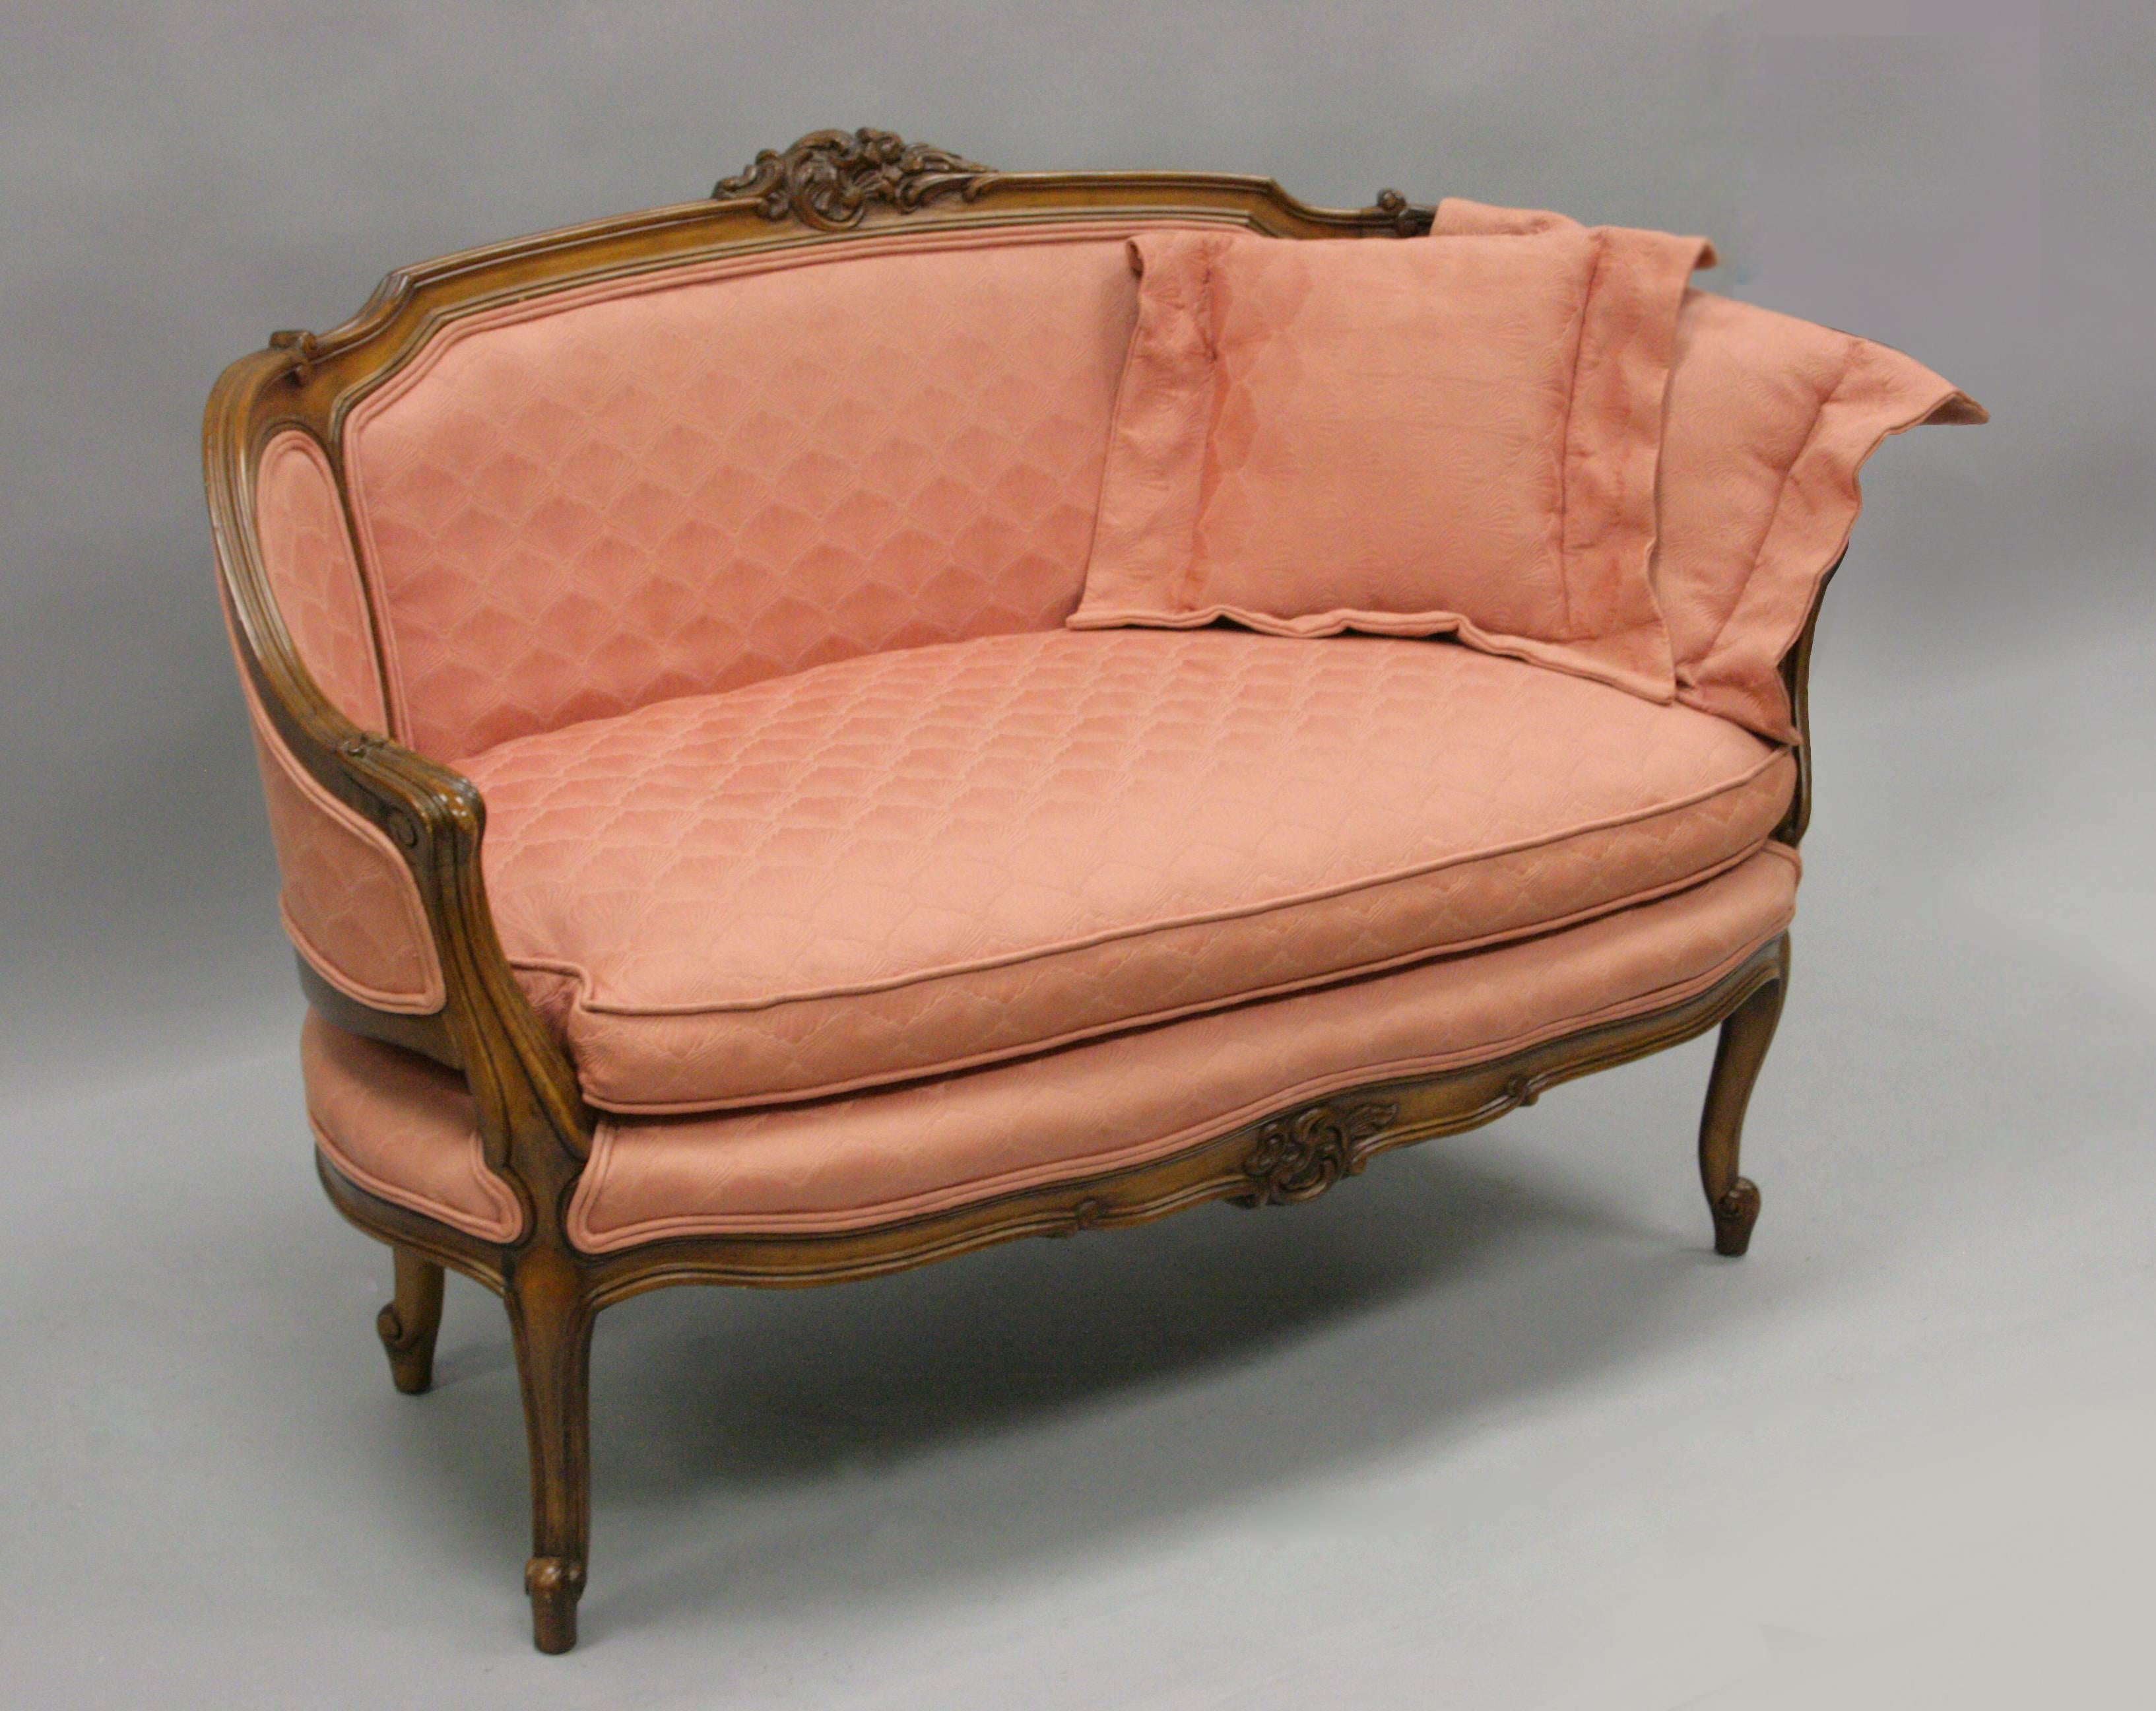 Beautiful vintage French Louis XV / country style carved walnut and pink upholstered settee. Item features four shapely cabriole legs, solid wood frame, carved pediment at the upper and lower rail, curved and carved arms, and great overall ovoid